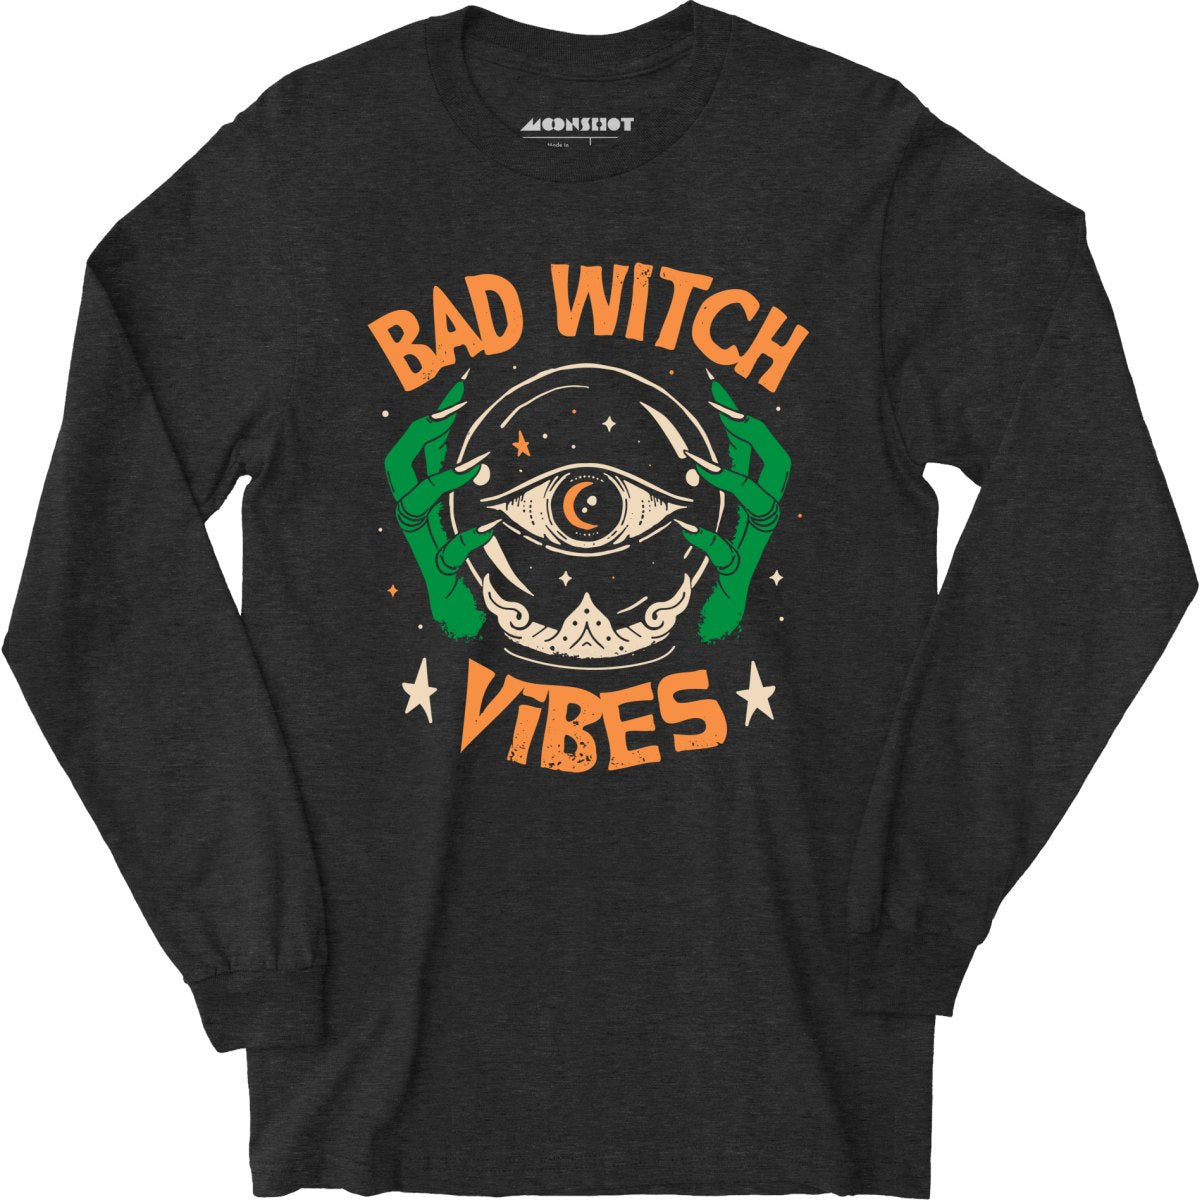 Bad Witch Vibes - Long Sleeve T-Shirt